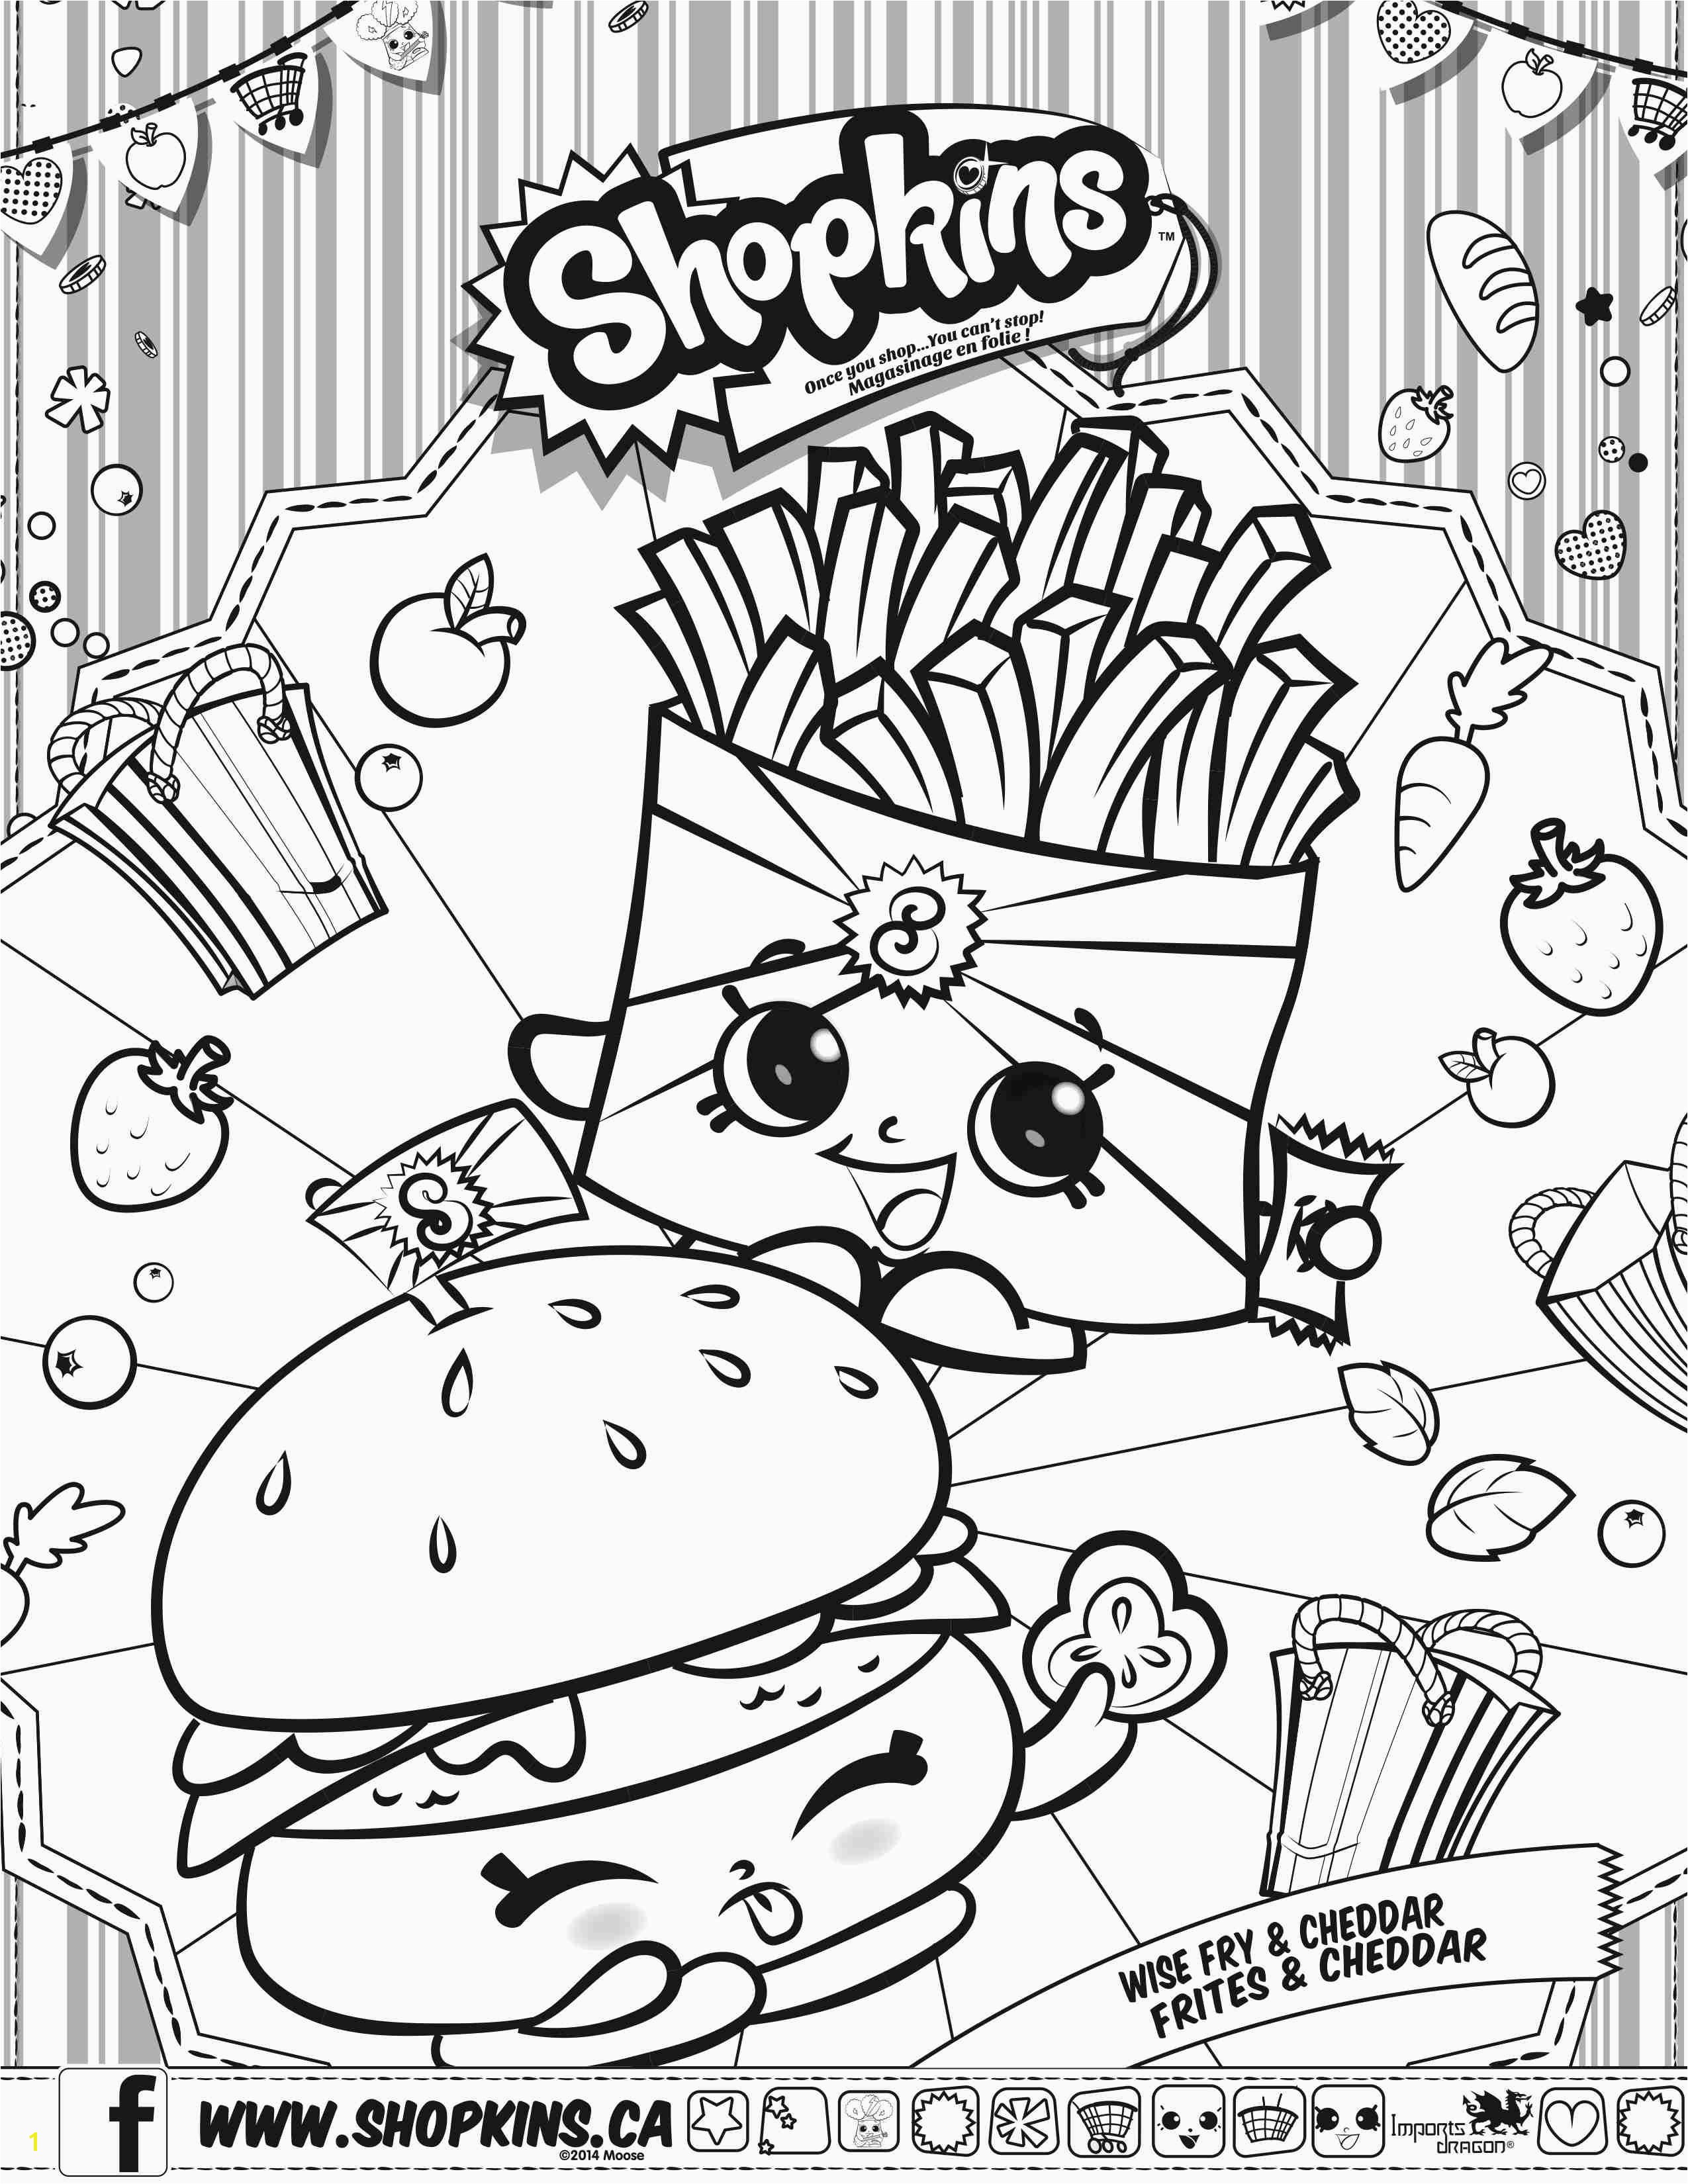 Theme Park Coloring Pages Rosa Parks Coloring Page Shopkins Coloring Pages Season 5 In 4 Ruva